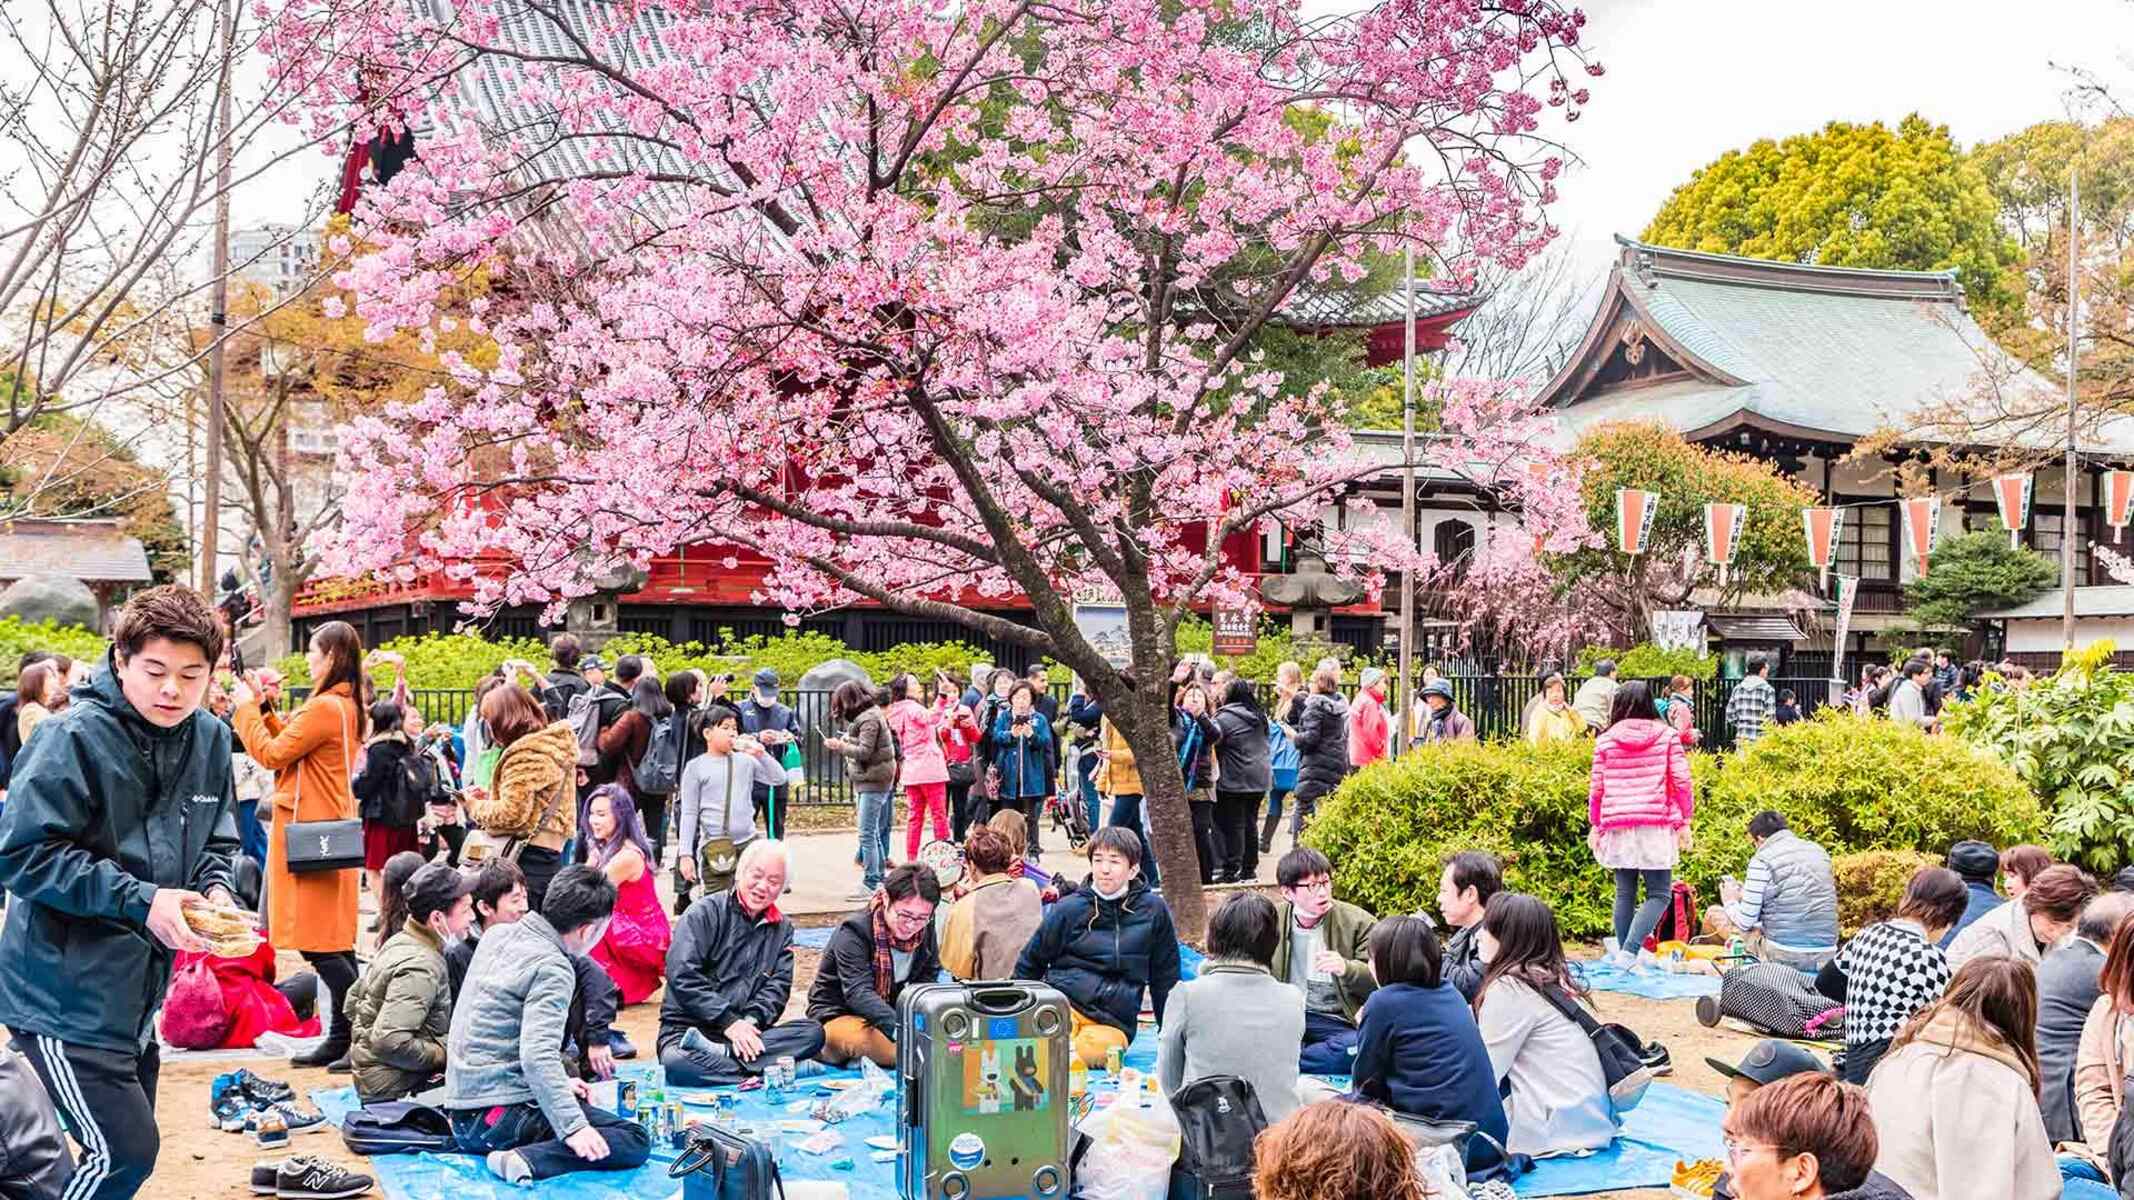 20-facts-about-hanami-cherry-blossom-viewing